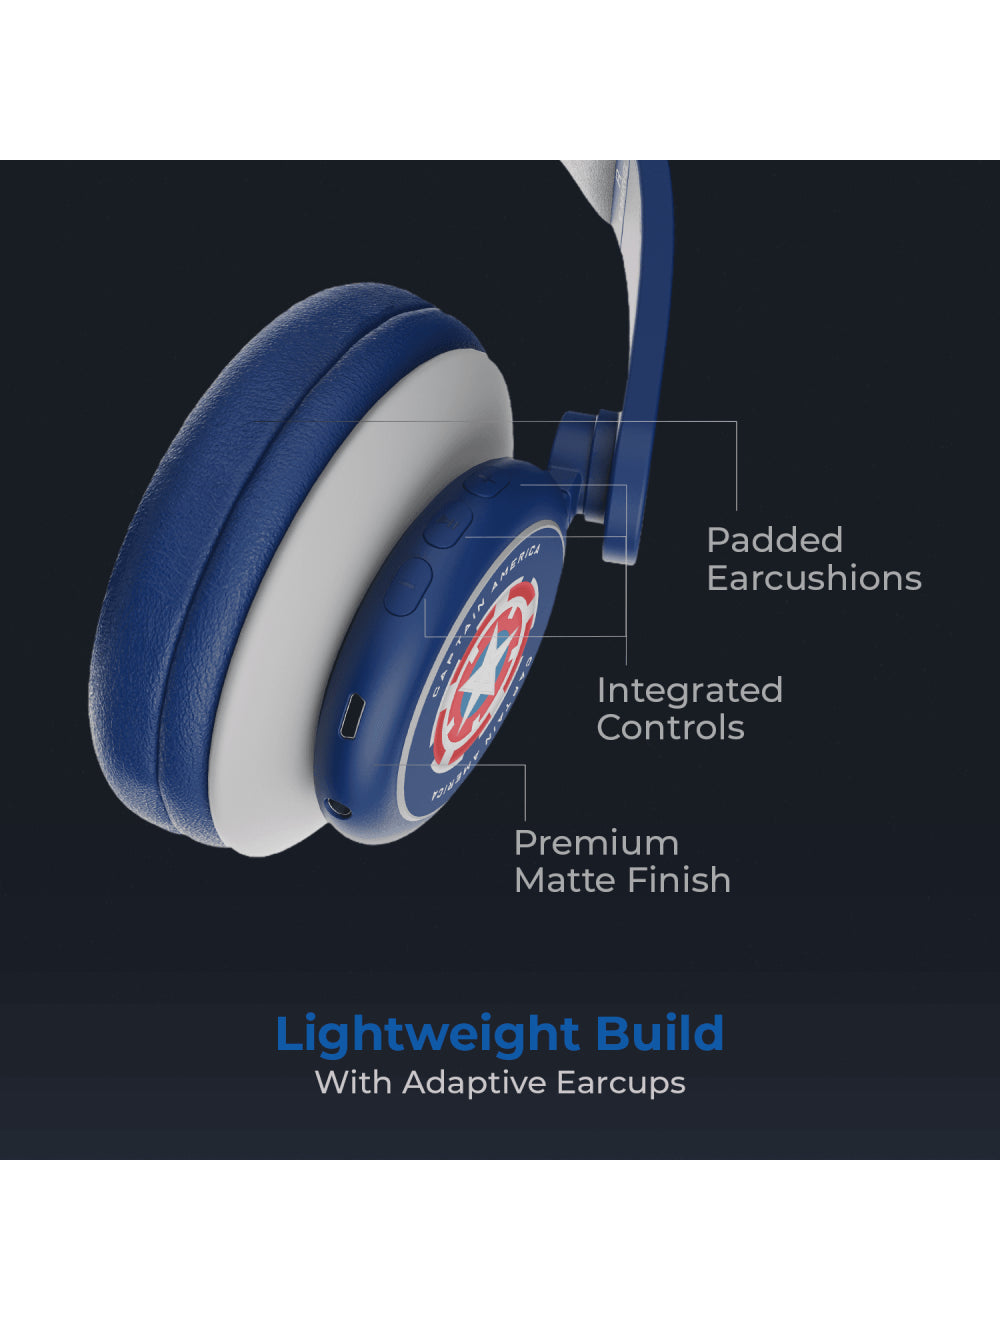 boAt Rockerz 450 Captain America Marvel Edition | Bluetooth Headphones with 40mm Audio Drivers, 15H Playback, Voice Assistant, Dual Connectivity